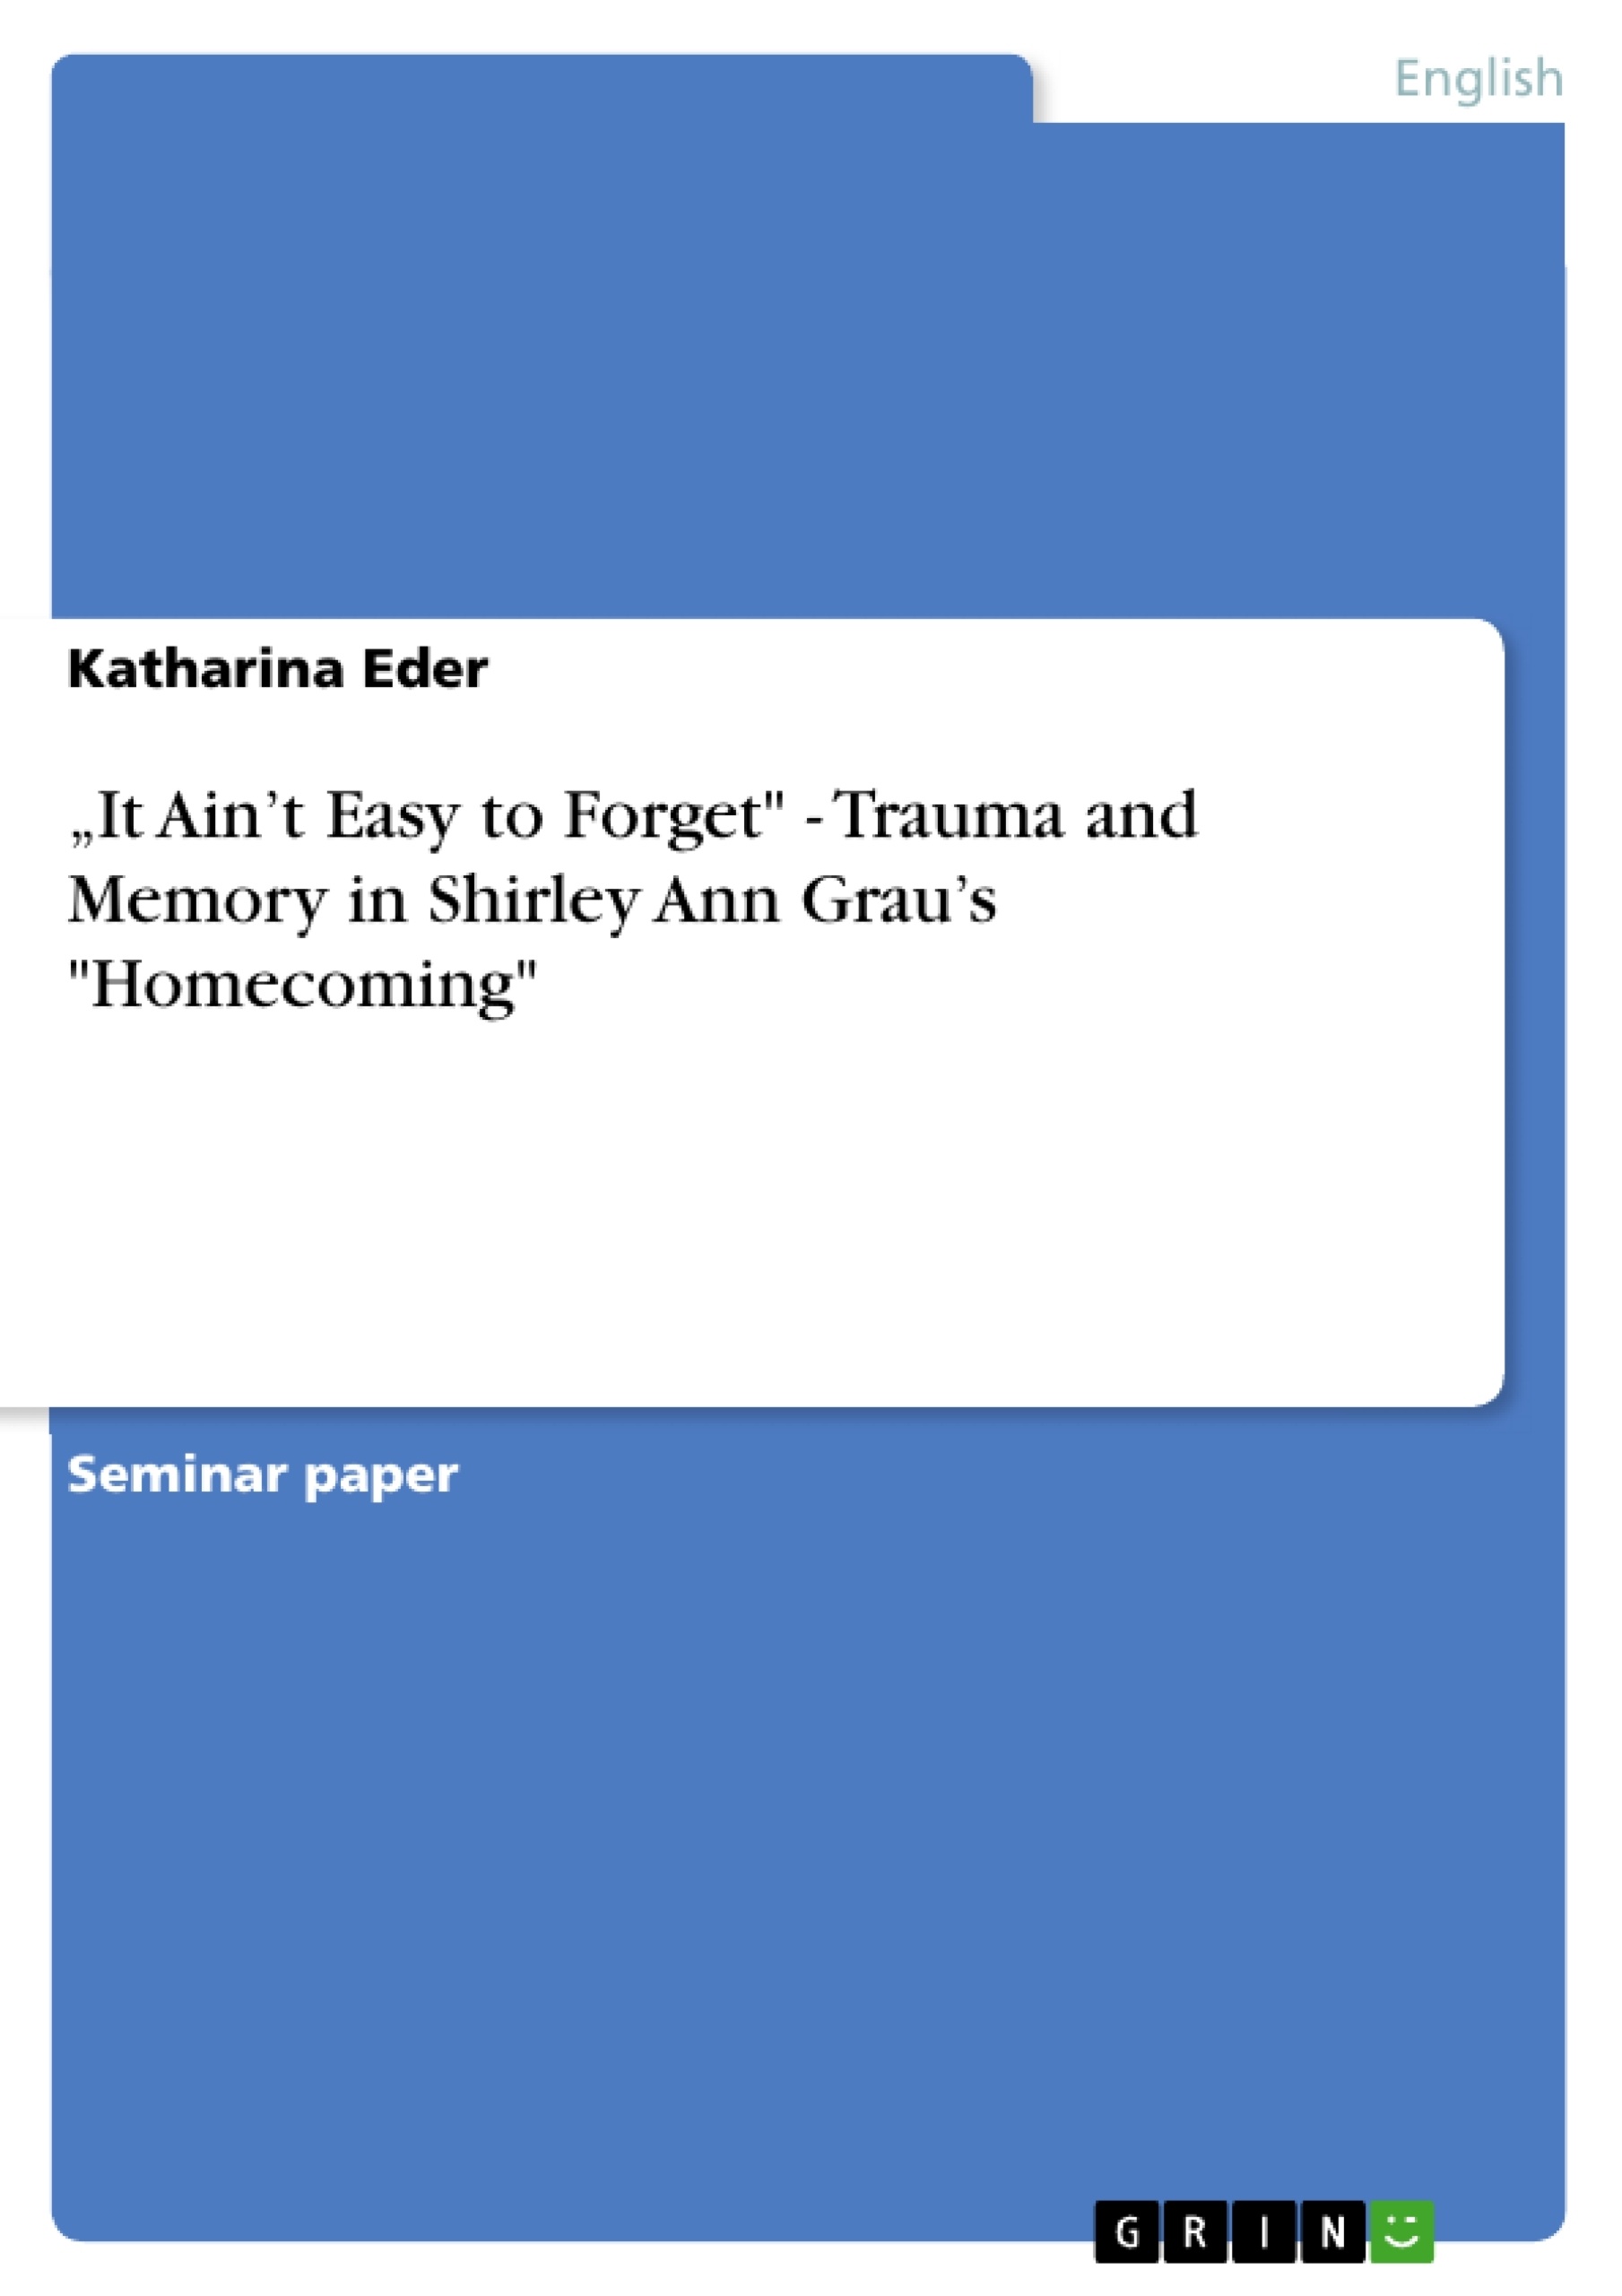 Titel: „It Ain’t Easy to Forget" - Trauma and Memory in Shirley Ann Grau’s "Homecoming"